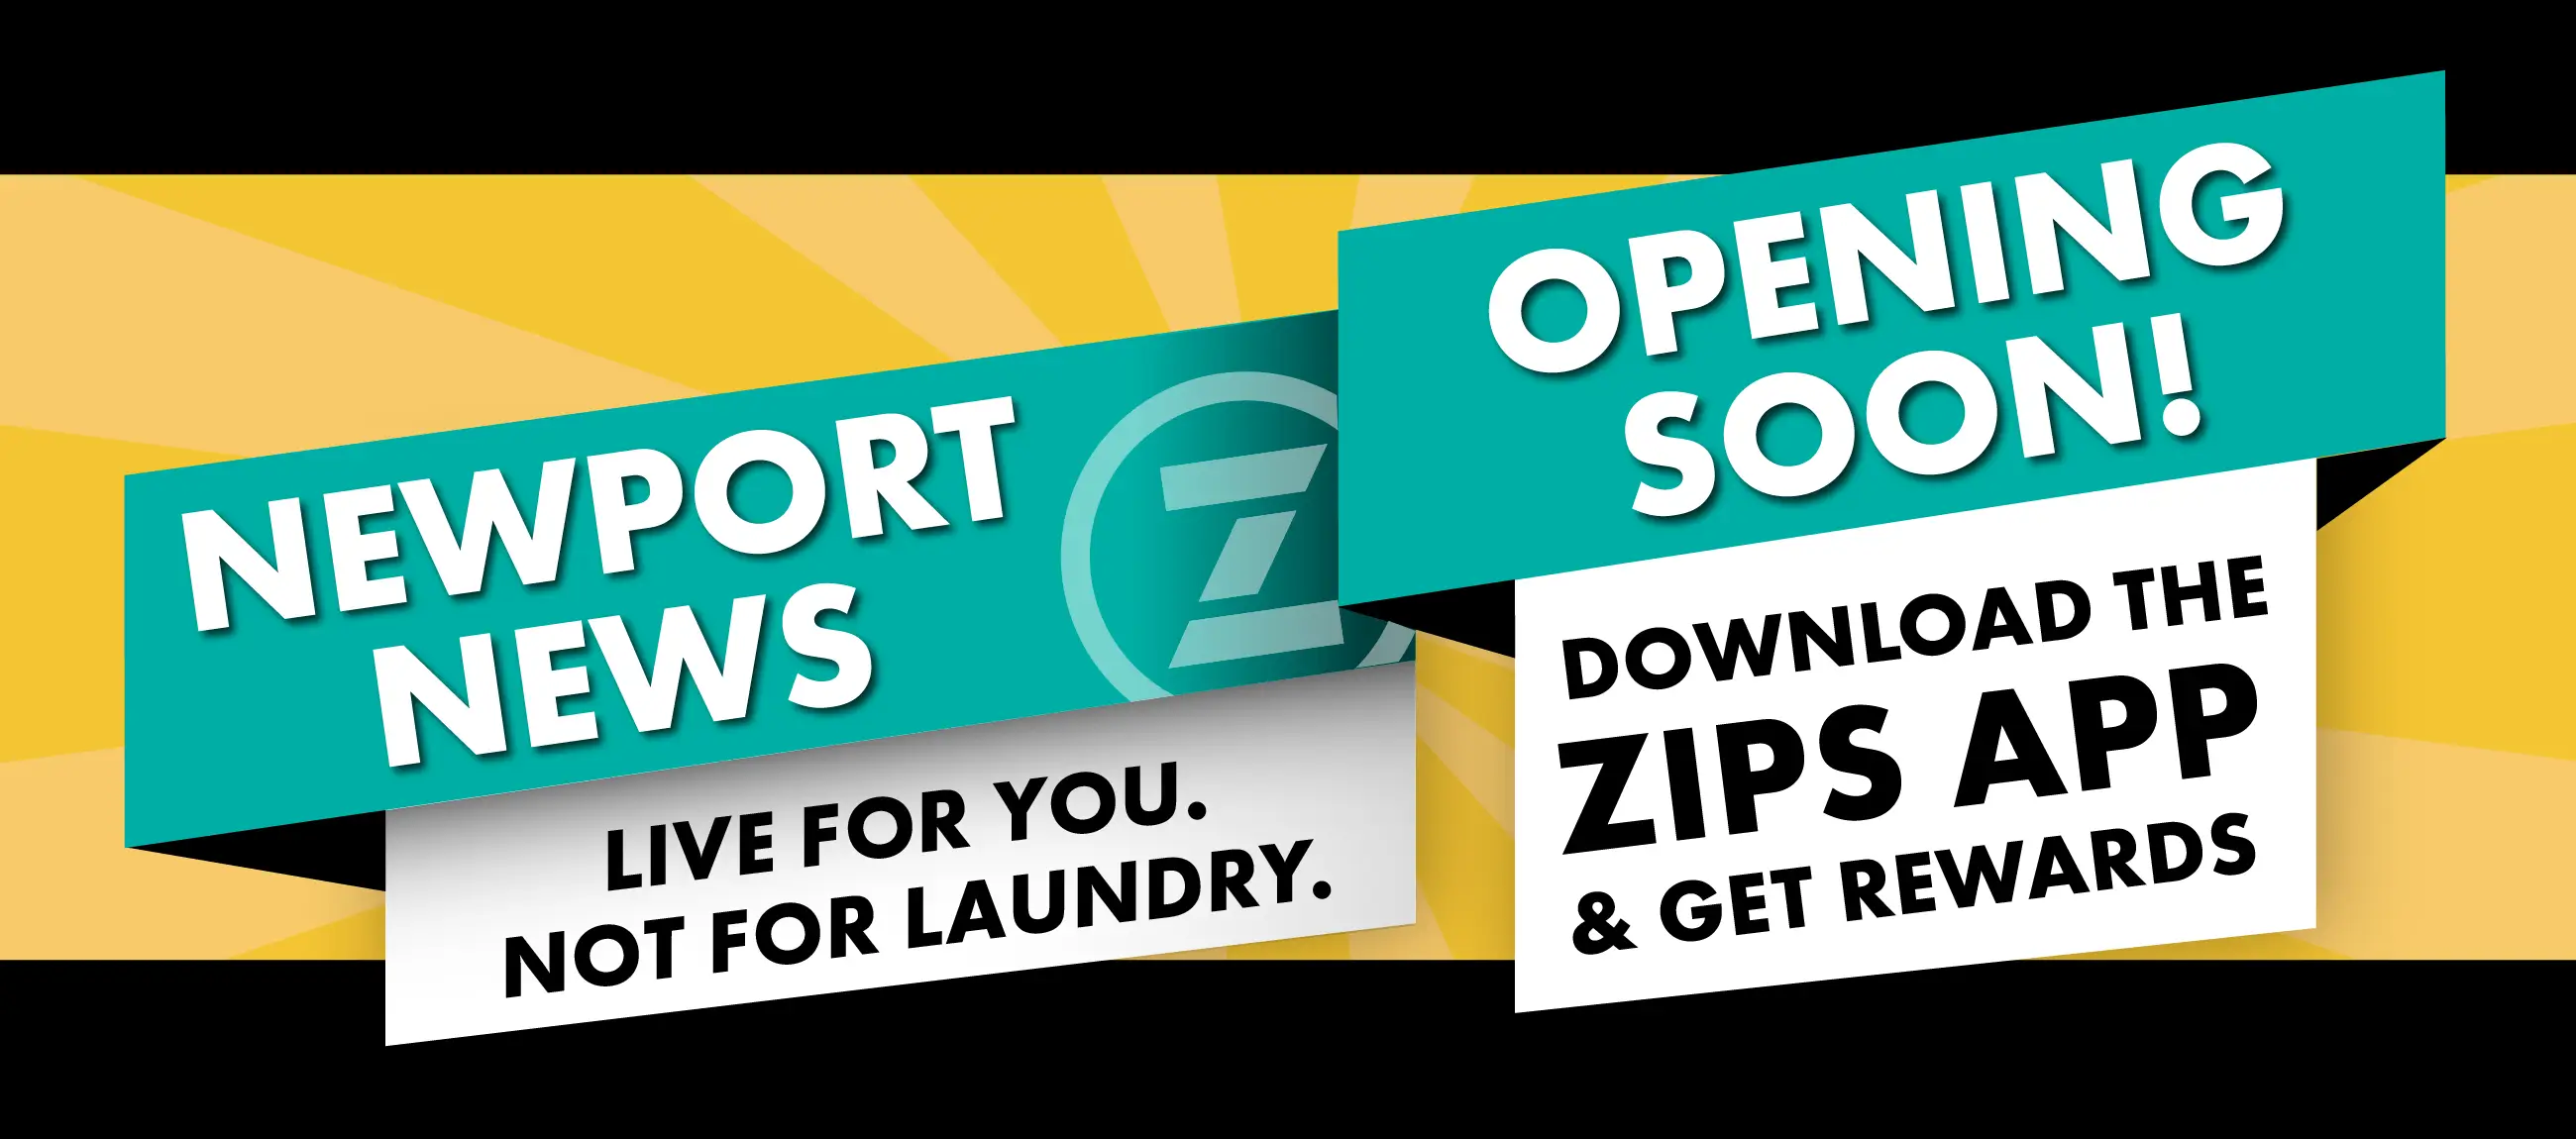 HELLO NEWPORT NEWS. OPENING SOON! LIVE FOR YOU NOT FOR LAUNDRY. DOWNLOAD THE ZIPS APP & GET REWARDS.